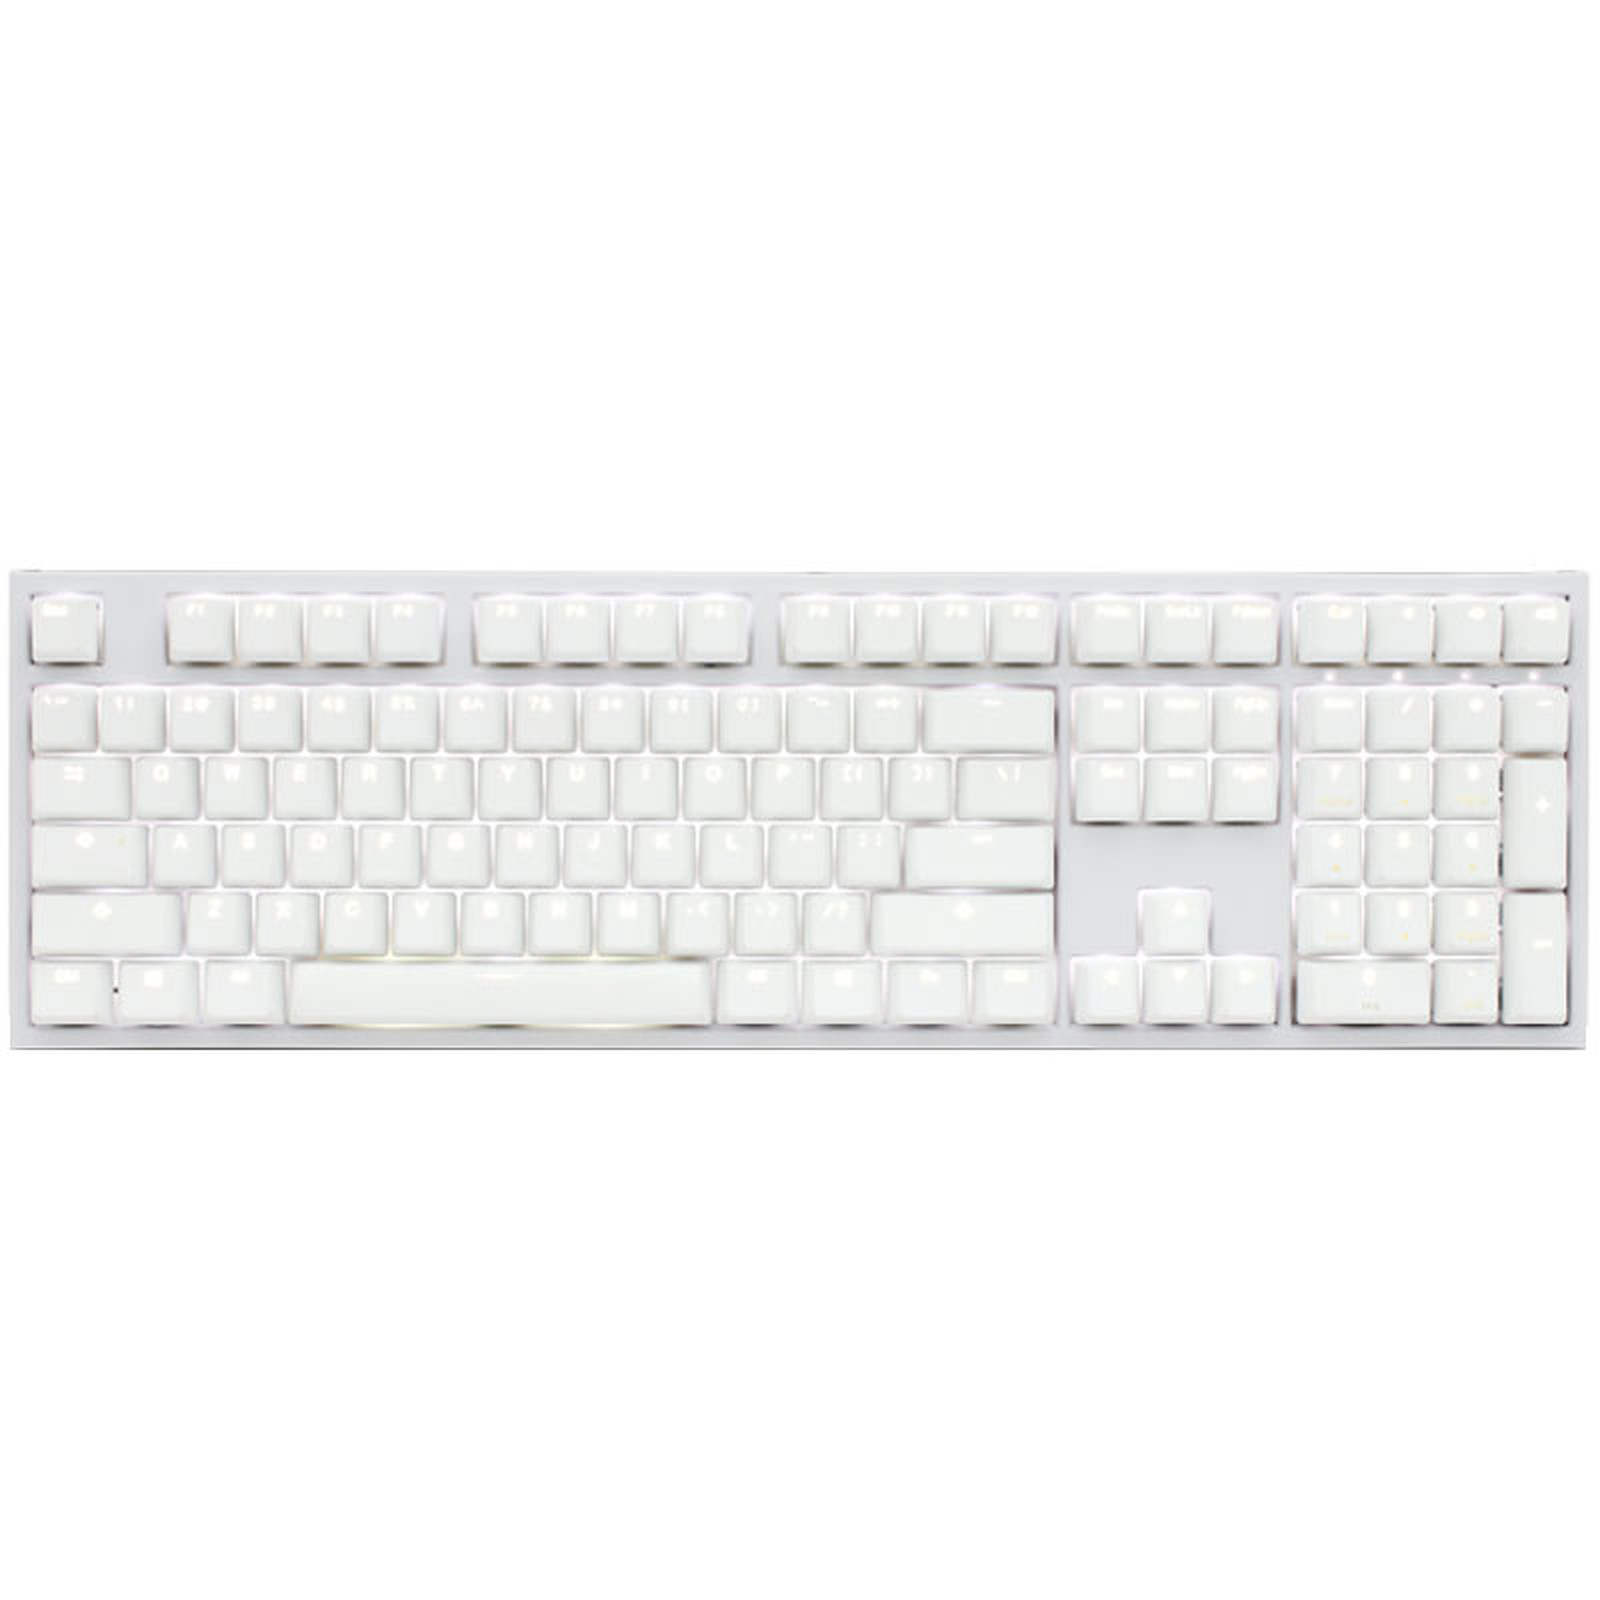 Ducky Channel One 2 Backlit (coloris blanc - Cherry MX Red - LEDs blanches) - Clavier PC Ducky Channel